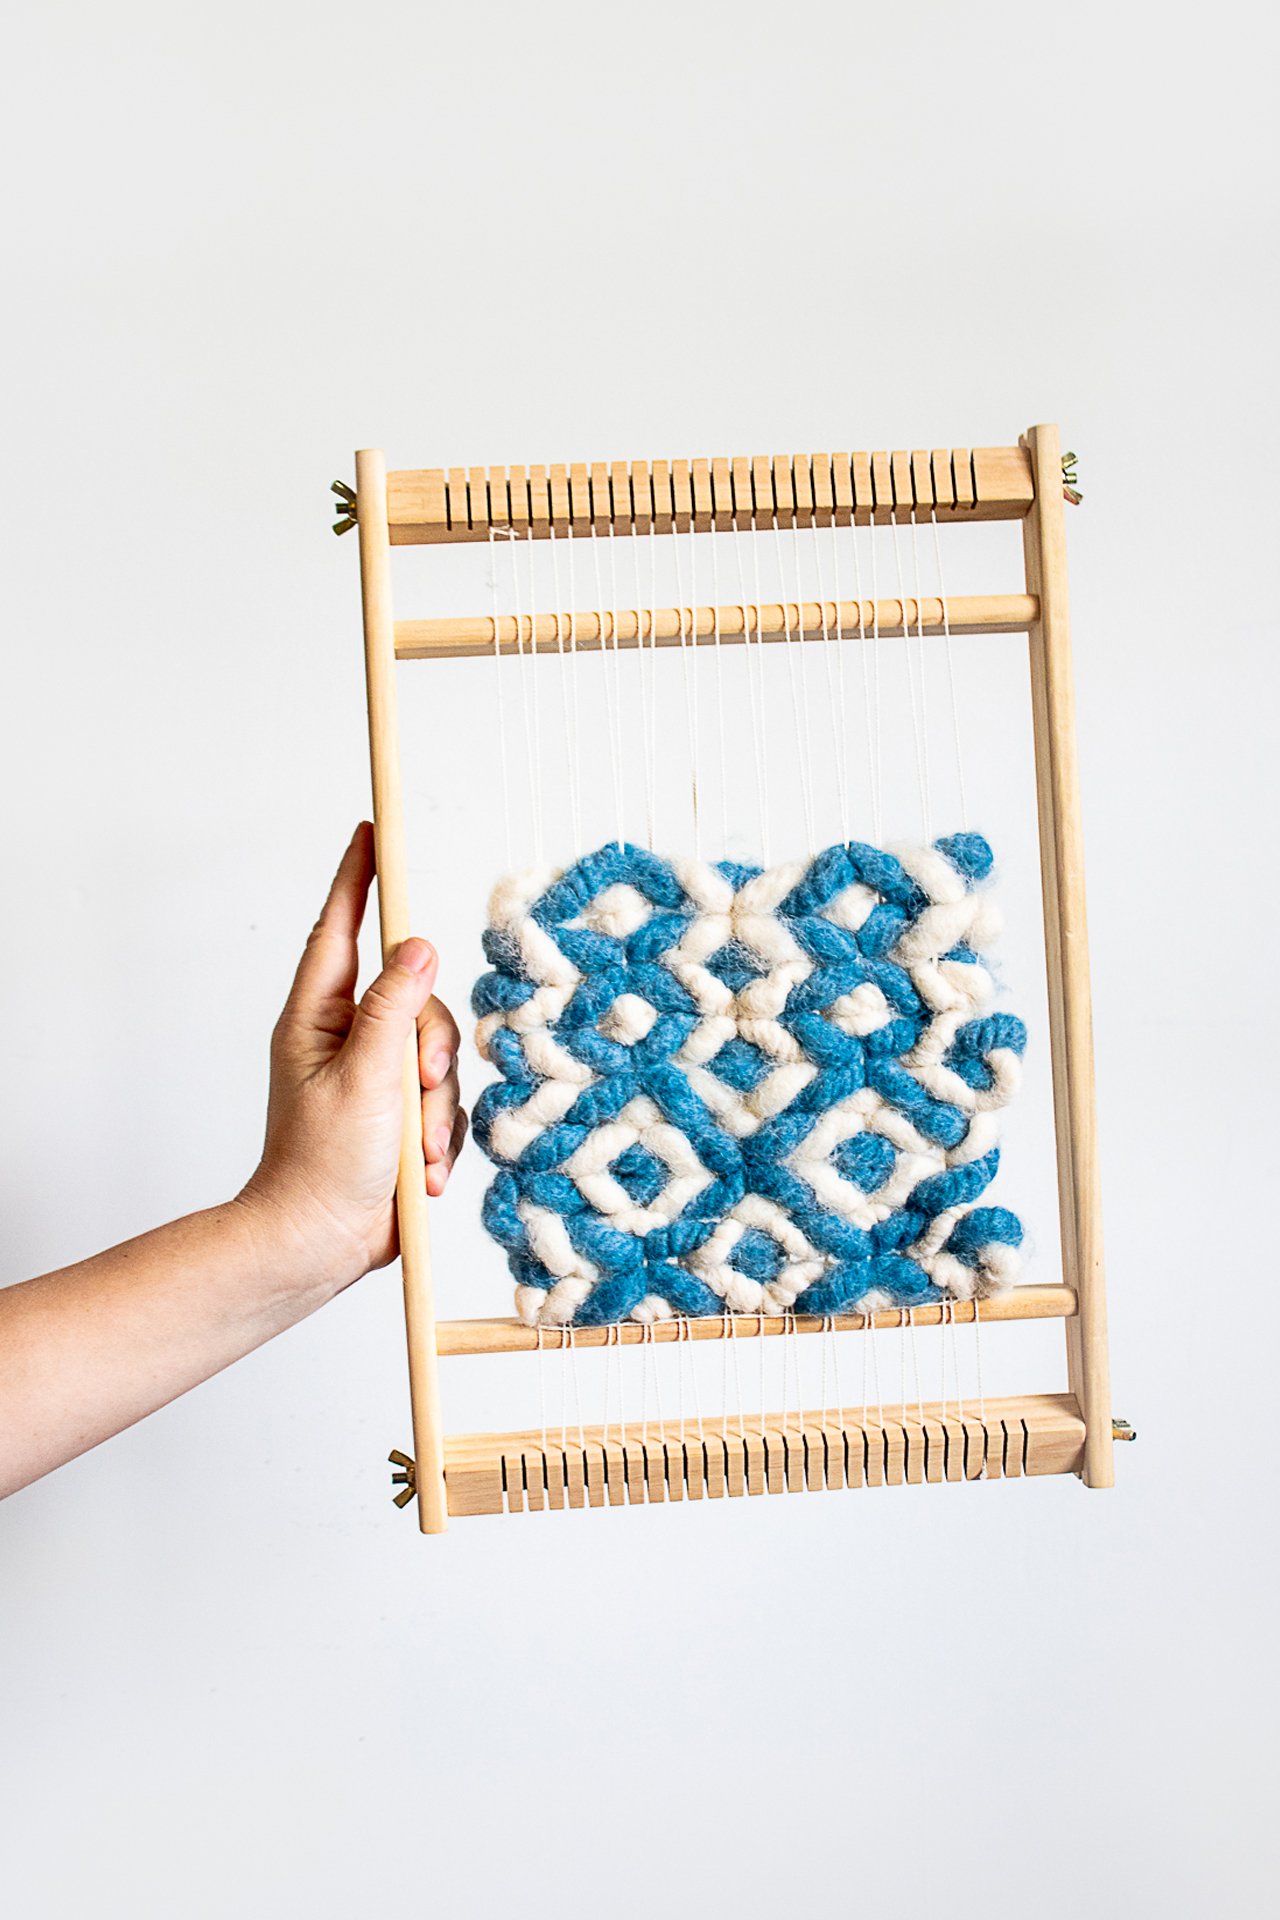 Lap Loom: Make smaller pieces or samples before warping your larger loom.